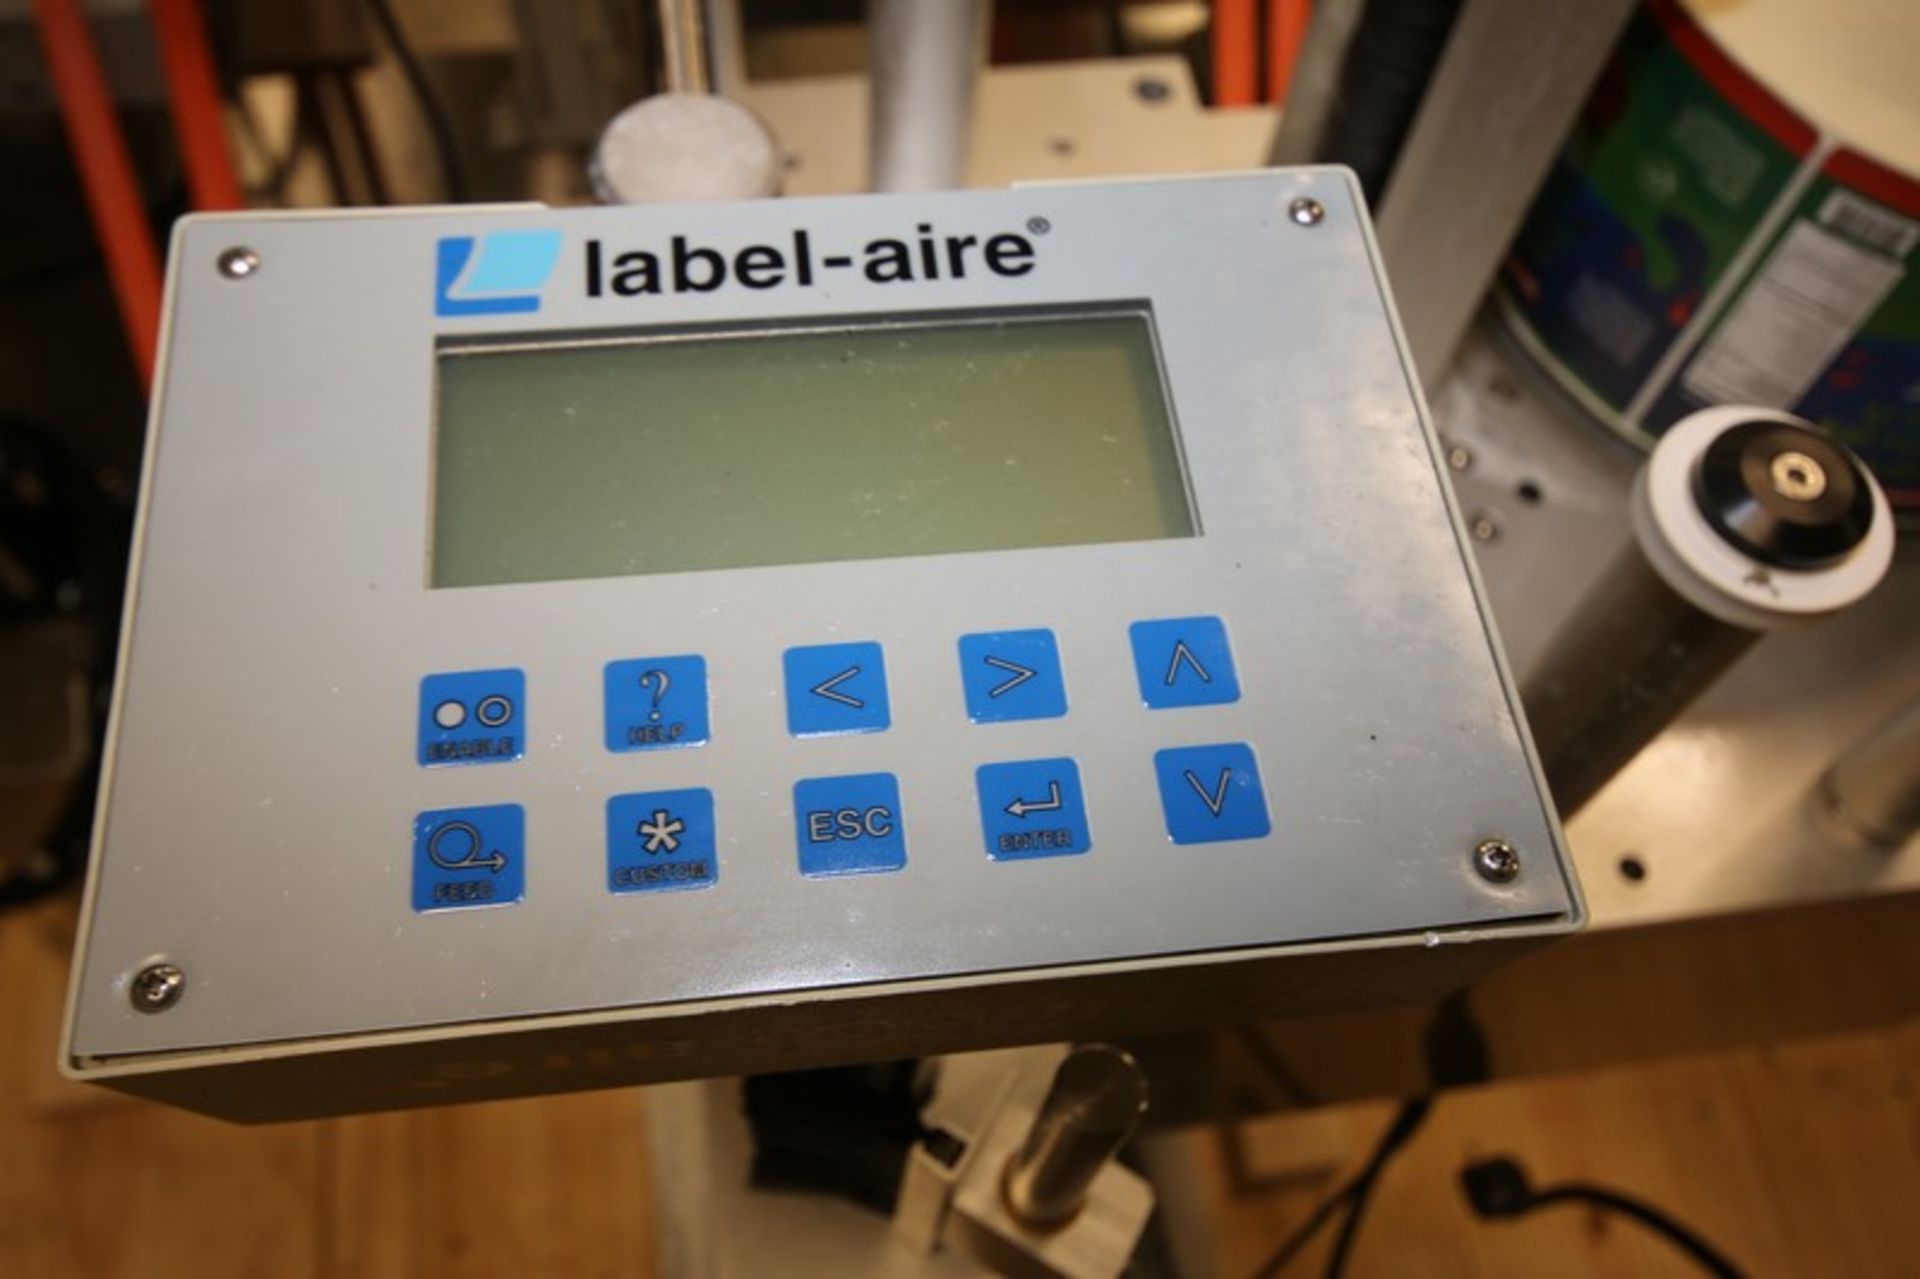 Labeler-Aire Inline S/S Labeling System, Model 5100 6" x 8' 3115NV 7" RH, SN 0335621111, with 6" W x - Image 12 of 14